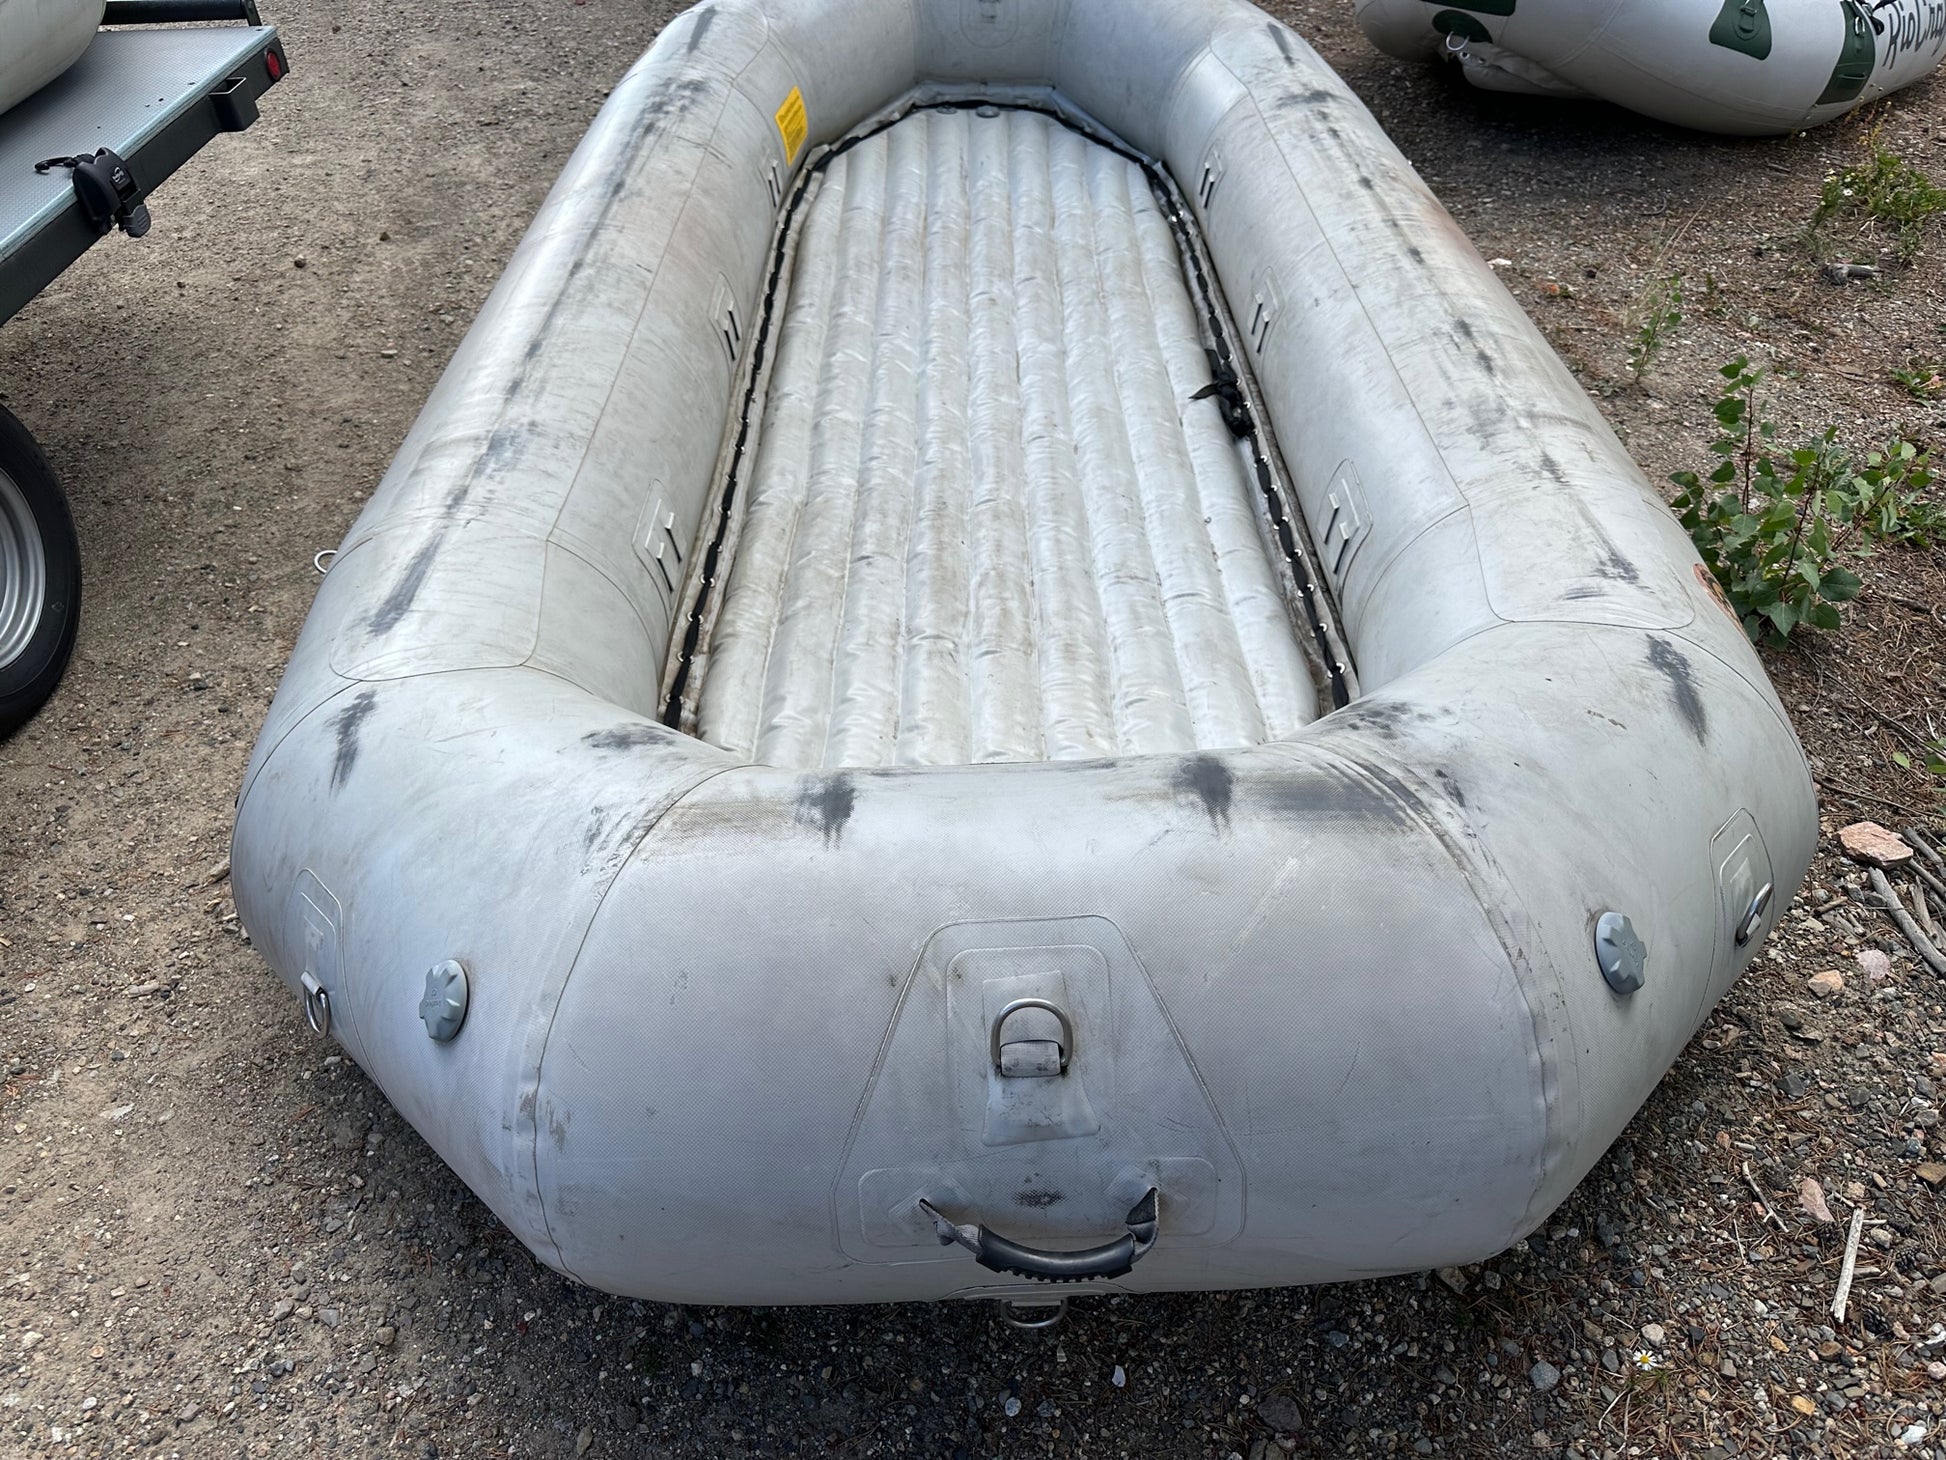 An inflatable Used 14' Rocky Mountain Raft in fair condition sitting on a gravel lot. For more information, please contact 4CRS.